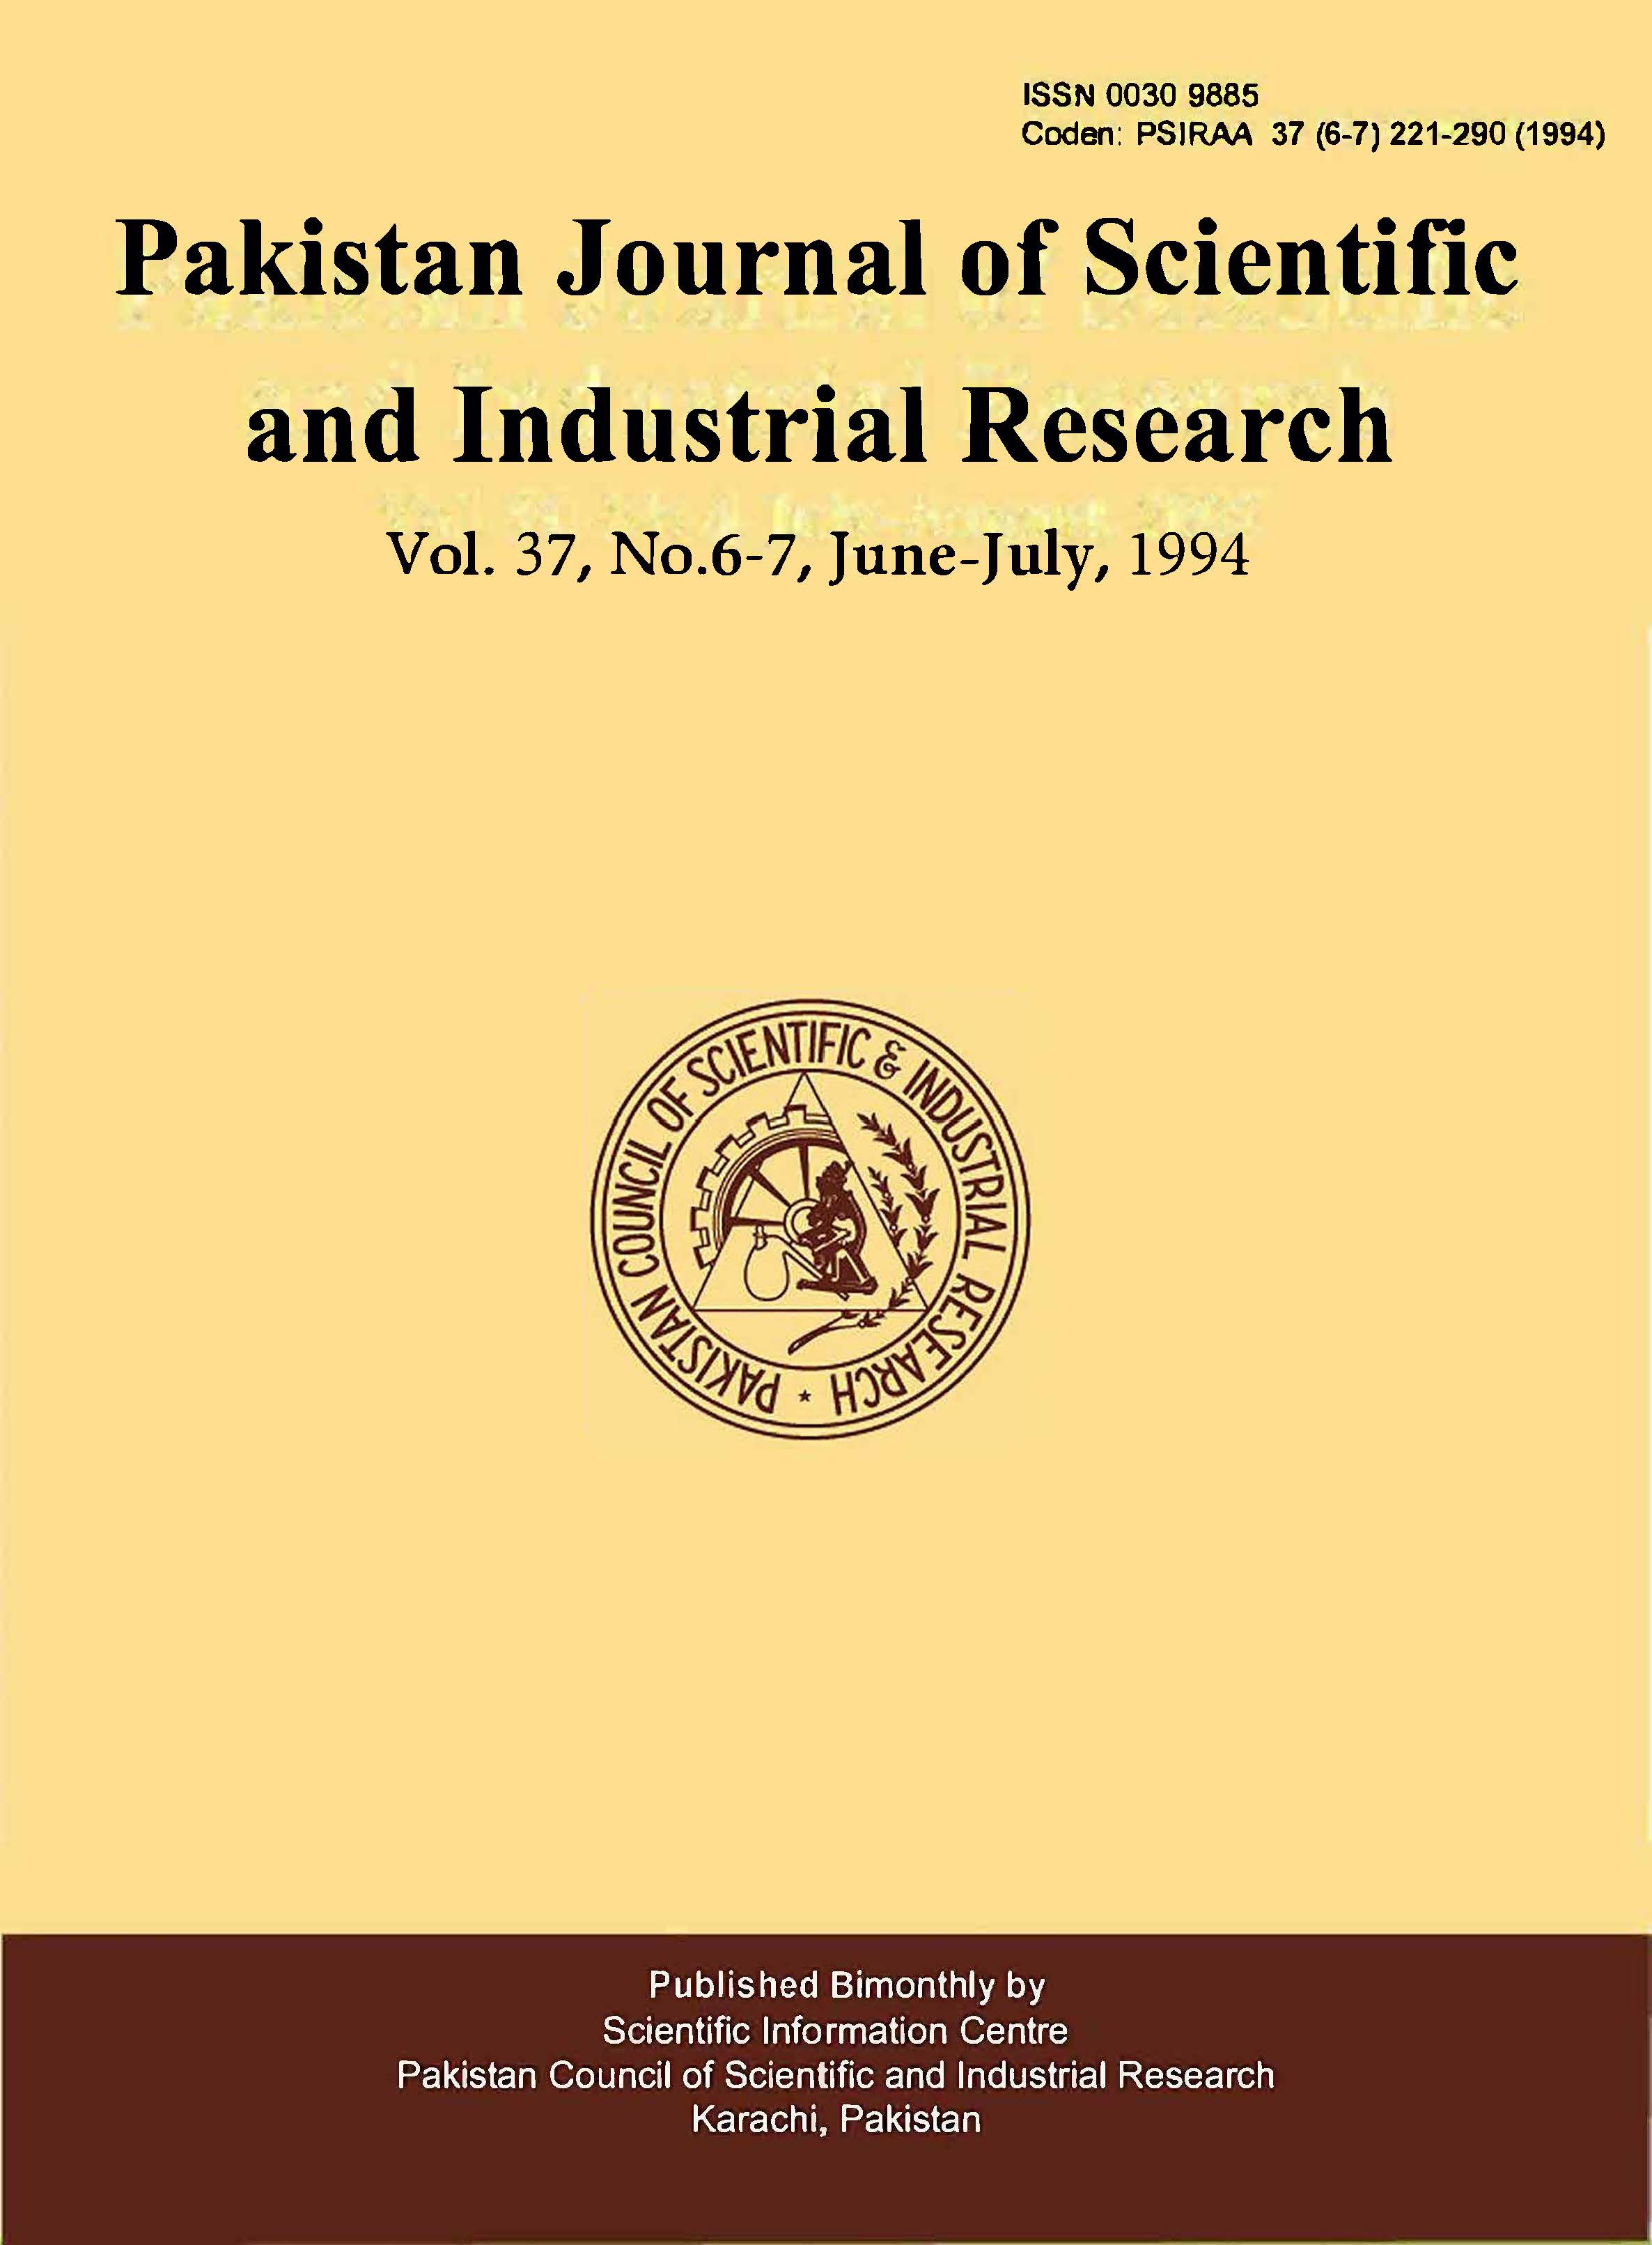 					View Vol. 37 No. 6-7 (1994): Pakistan Journal of Scientific and Industrial Research
				